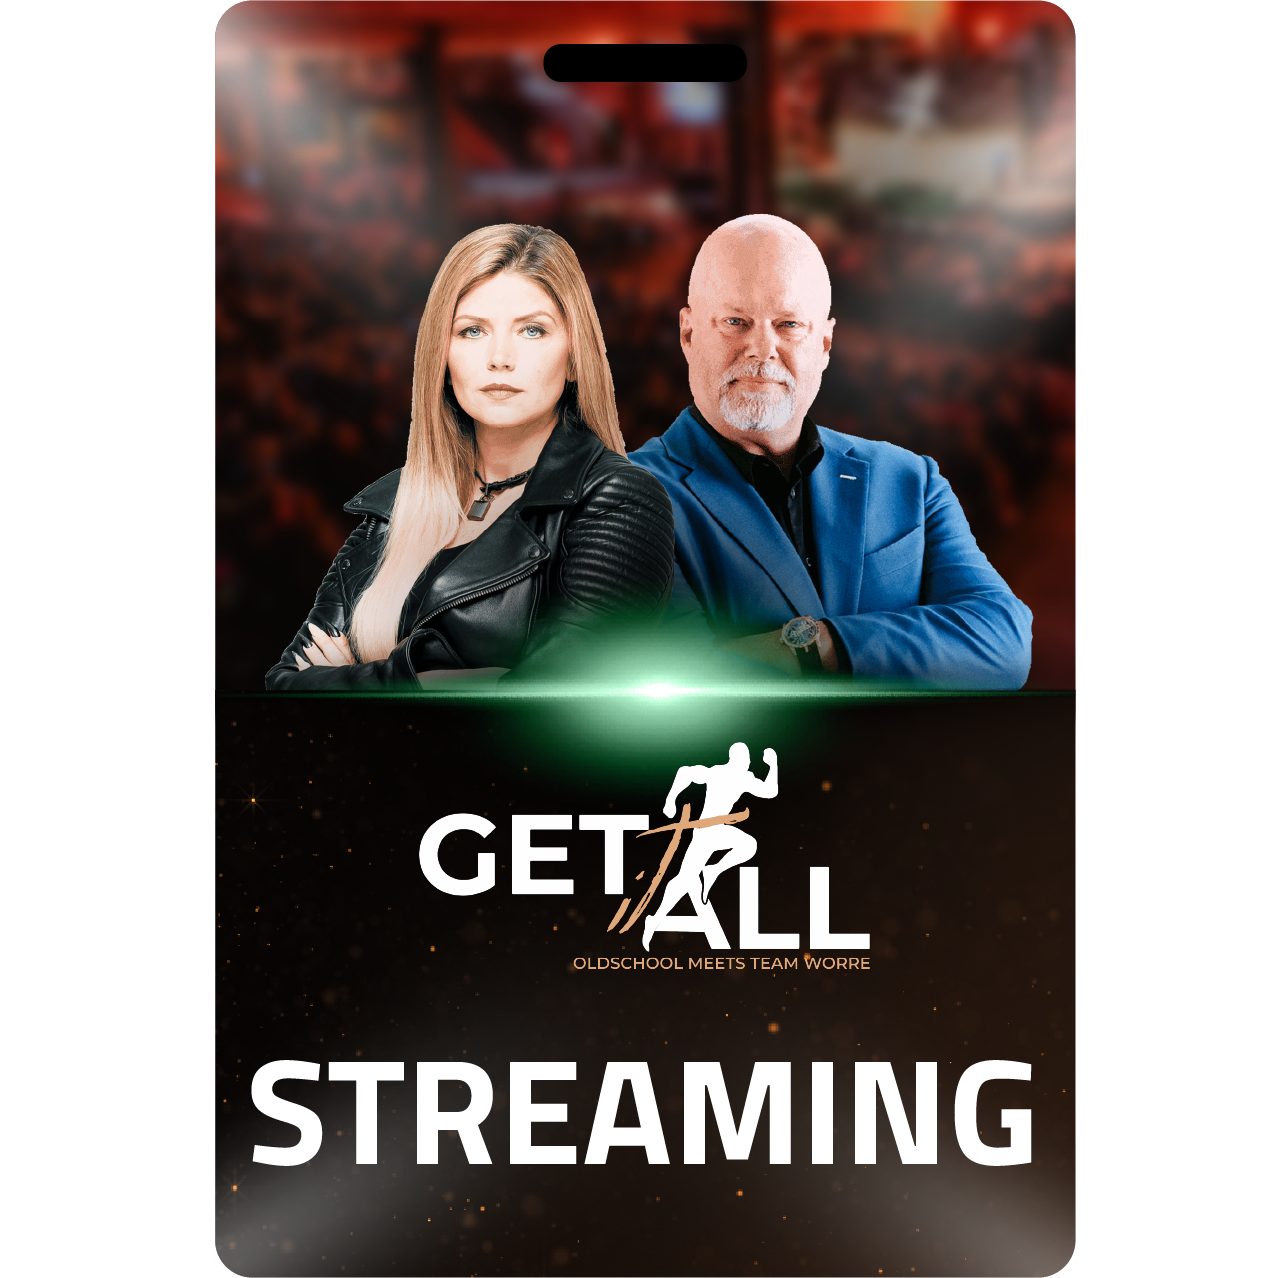 GET IT ALL: TEAM WORRE 2021 Streaming Ticket